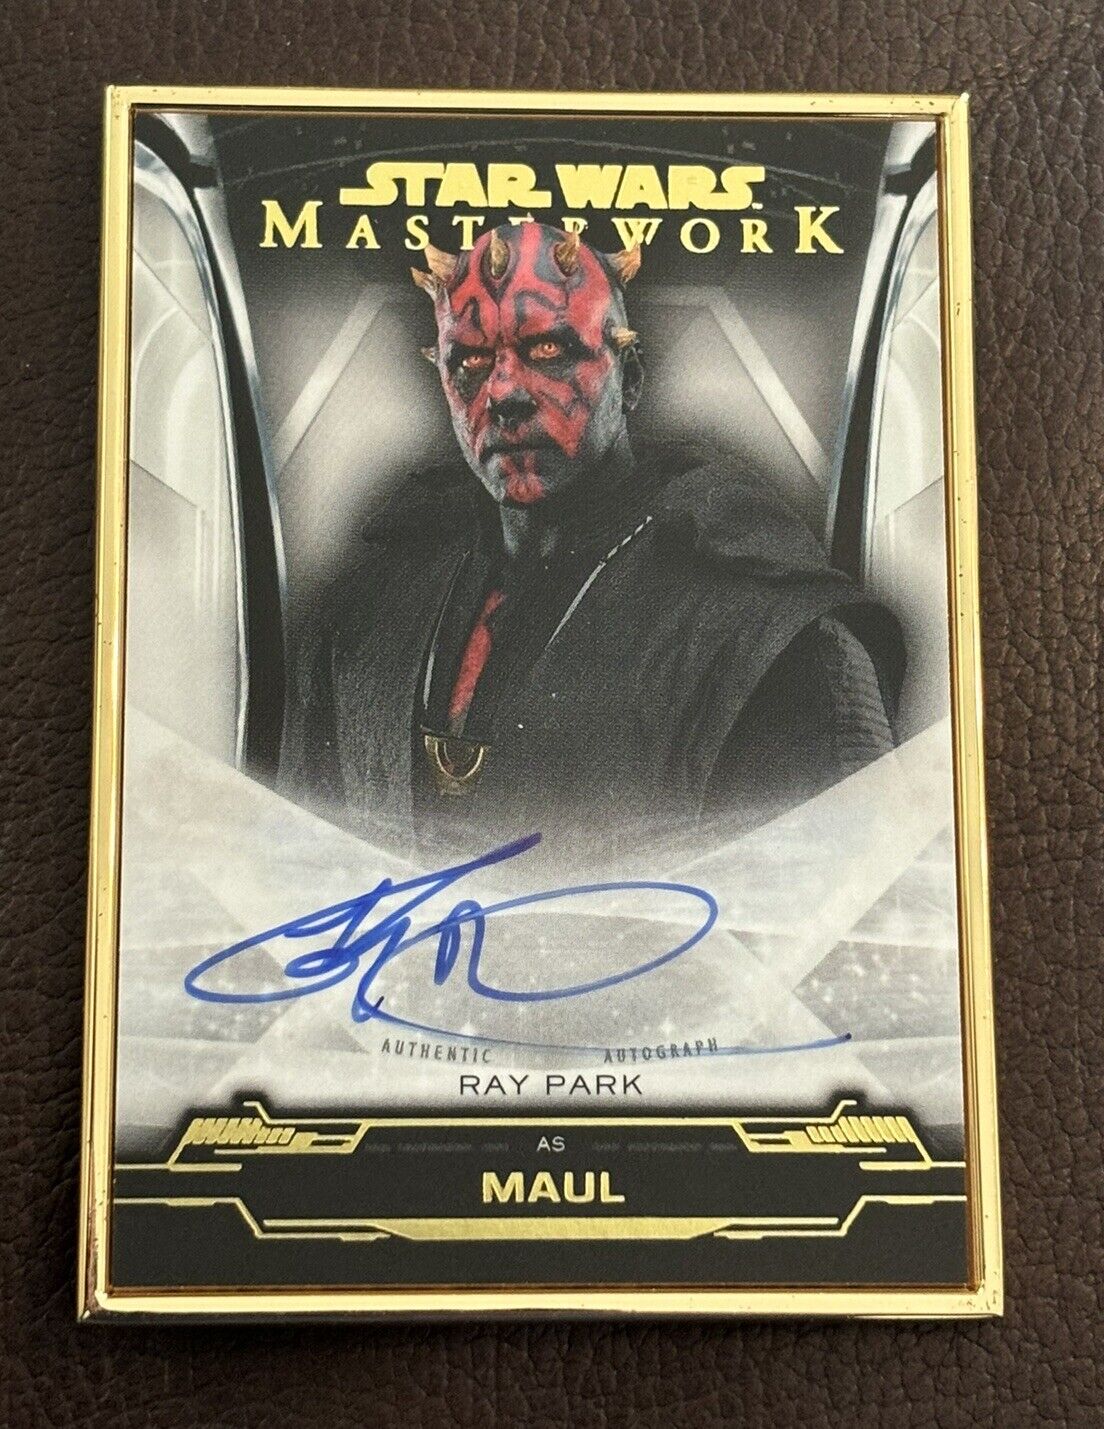 2019 Topps Star Wars Masterwork Ray Park Gold Frame Autograph 1/1 Auto Maul READ